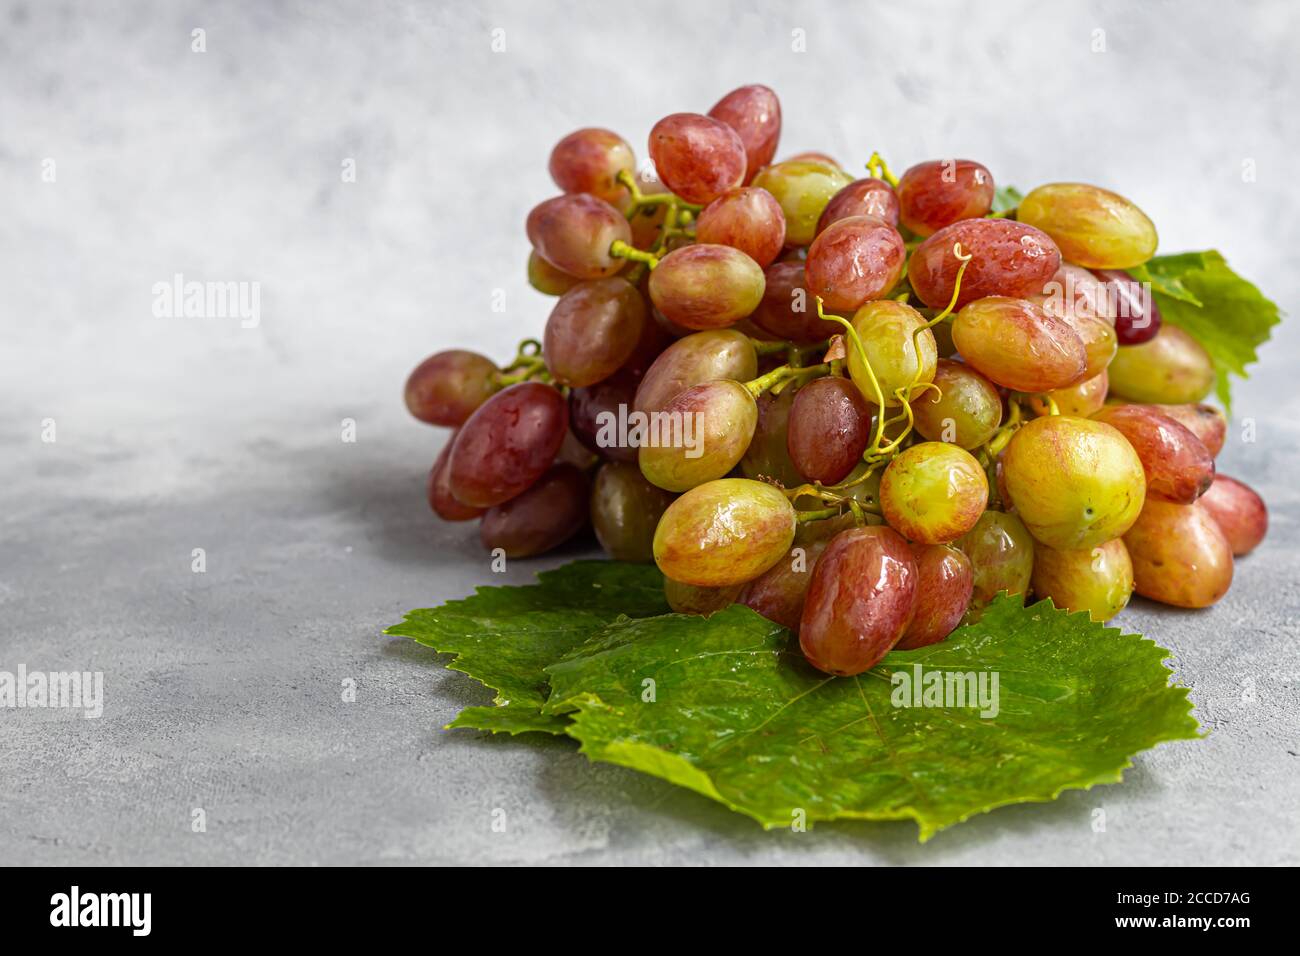 Large and light, wine grapes. It is covered with a white coating called yeast. With their help, wine is obtained. Water drops on berries. On a gray ba Stock Photo